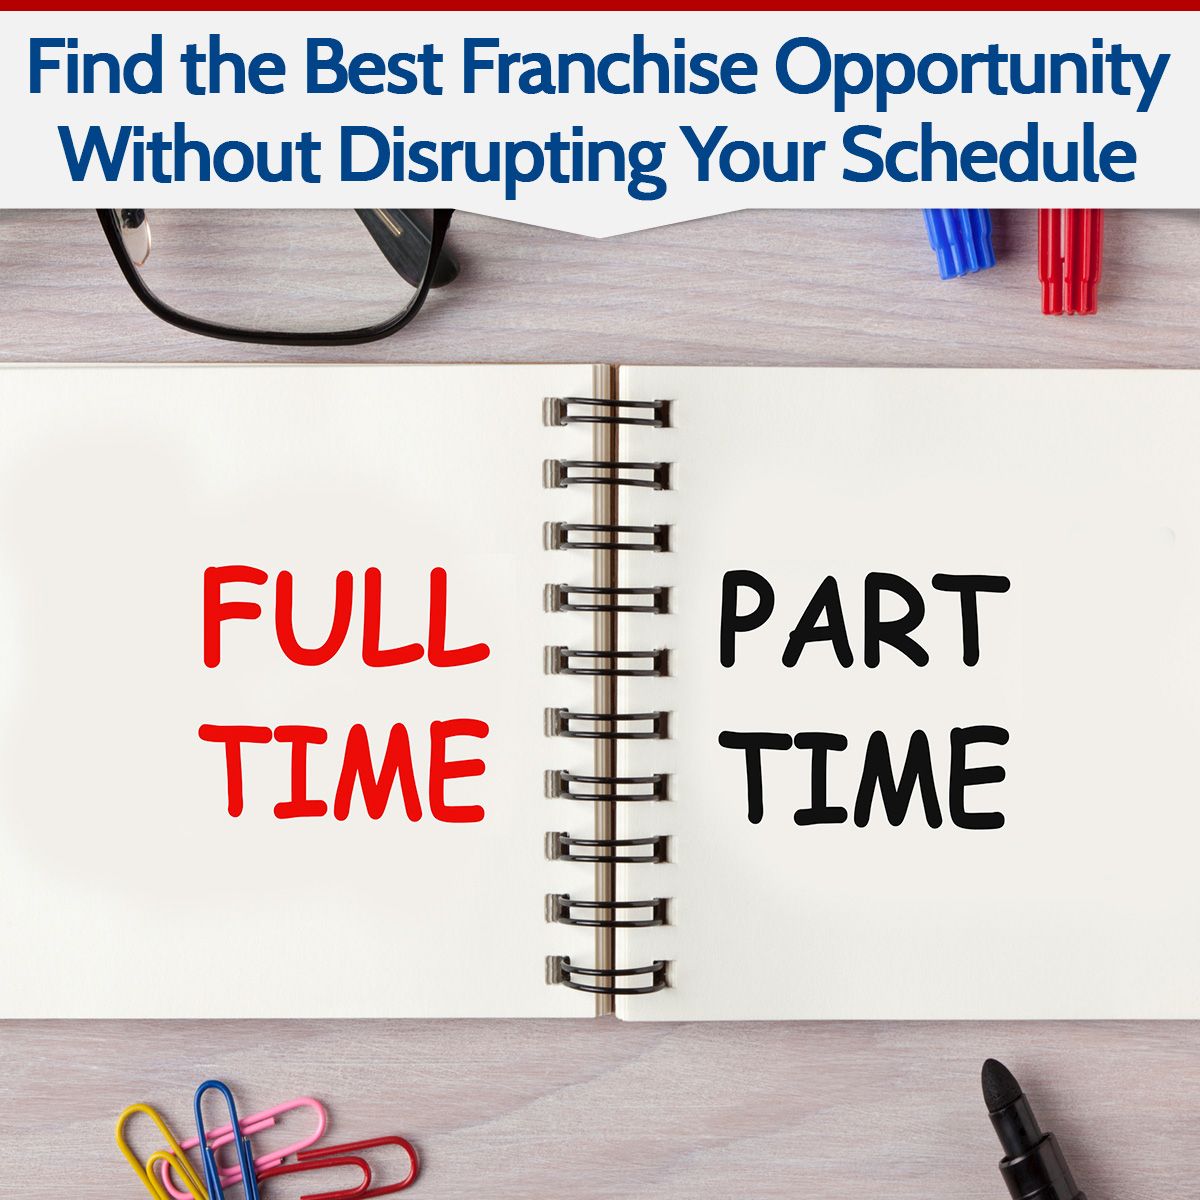 Find the Best Franchise Opportunity Without Disrupting Your Schedule